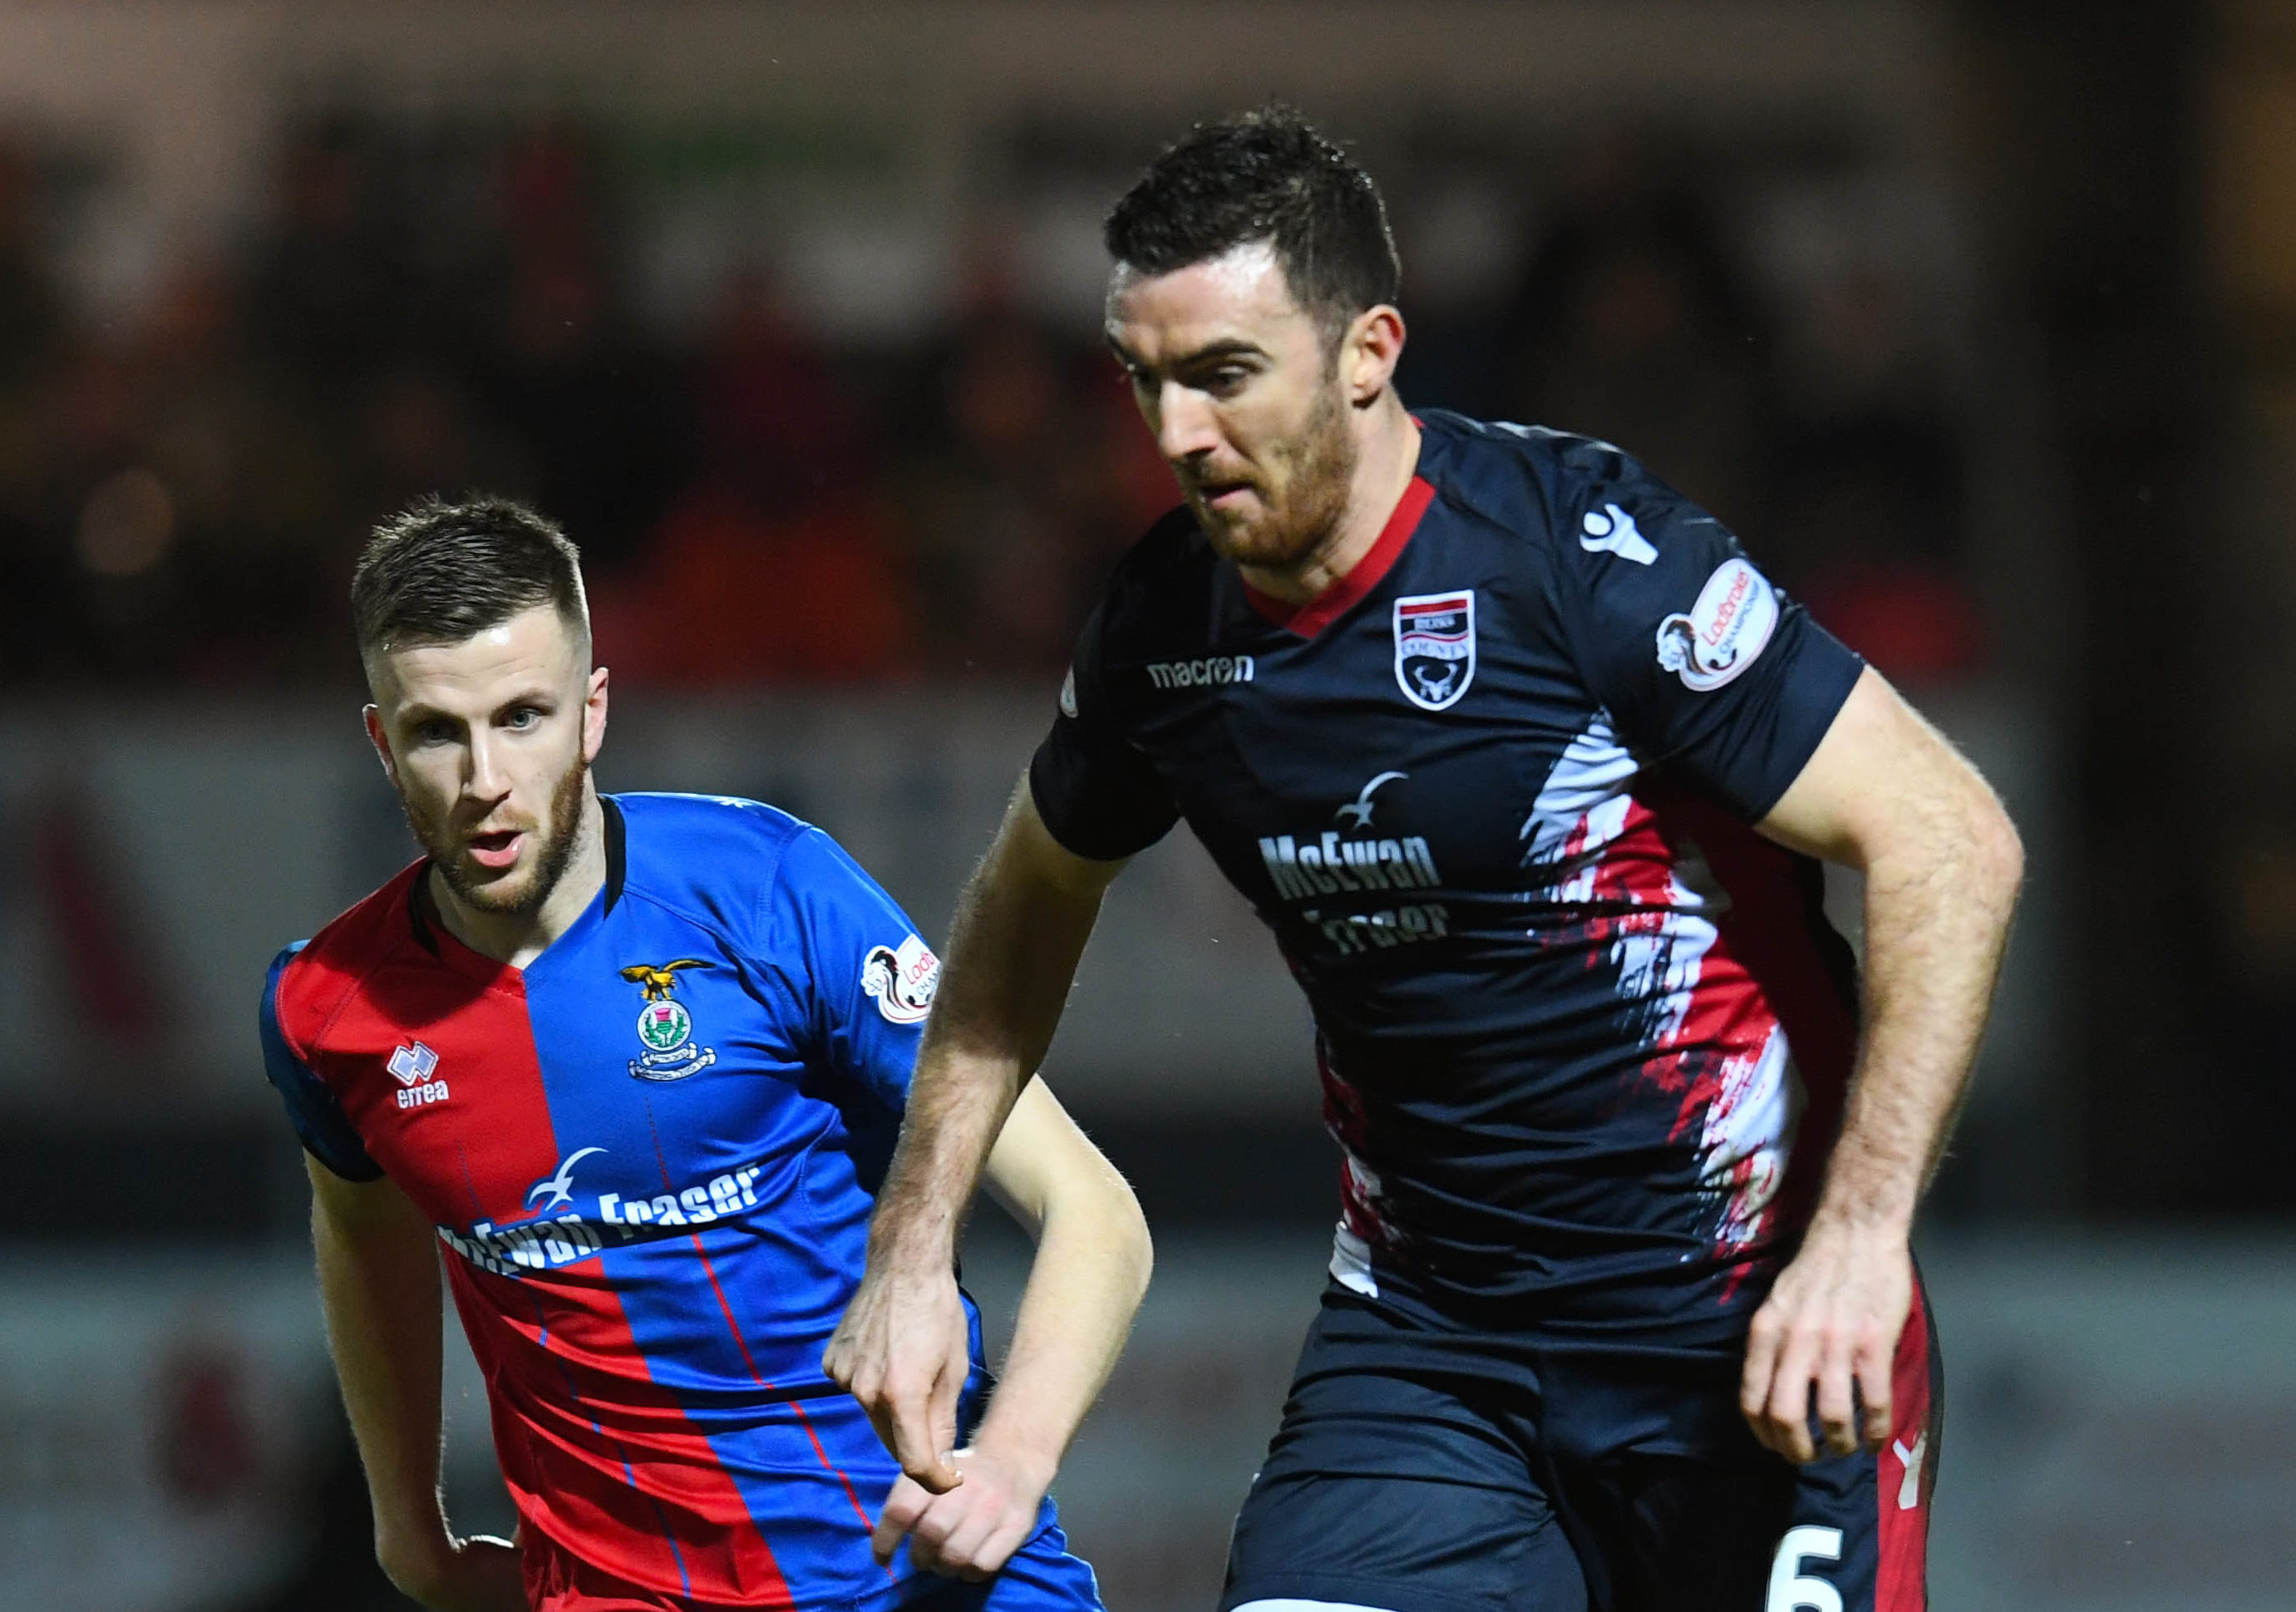 Ross County's Ross Draper (R) in action with Inverness CT's Liam Polworth.